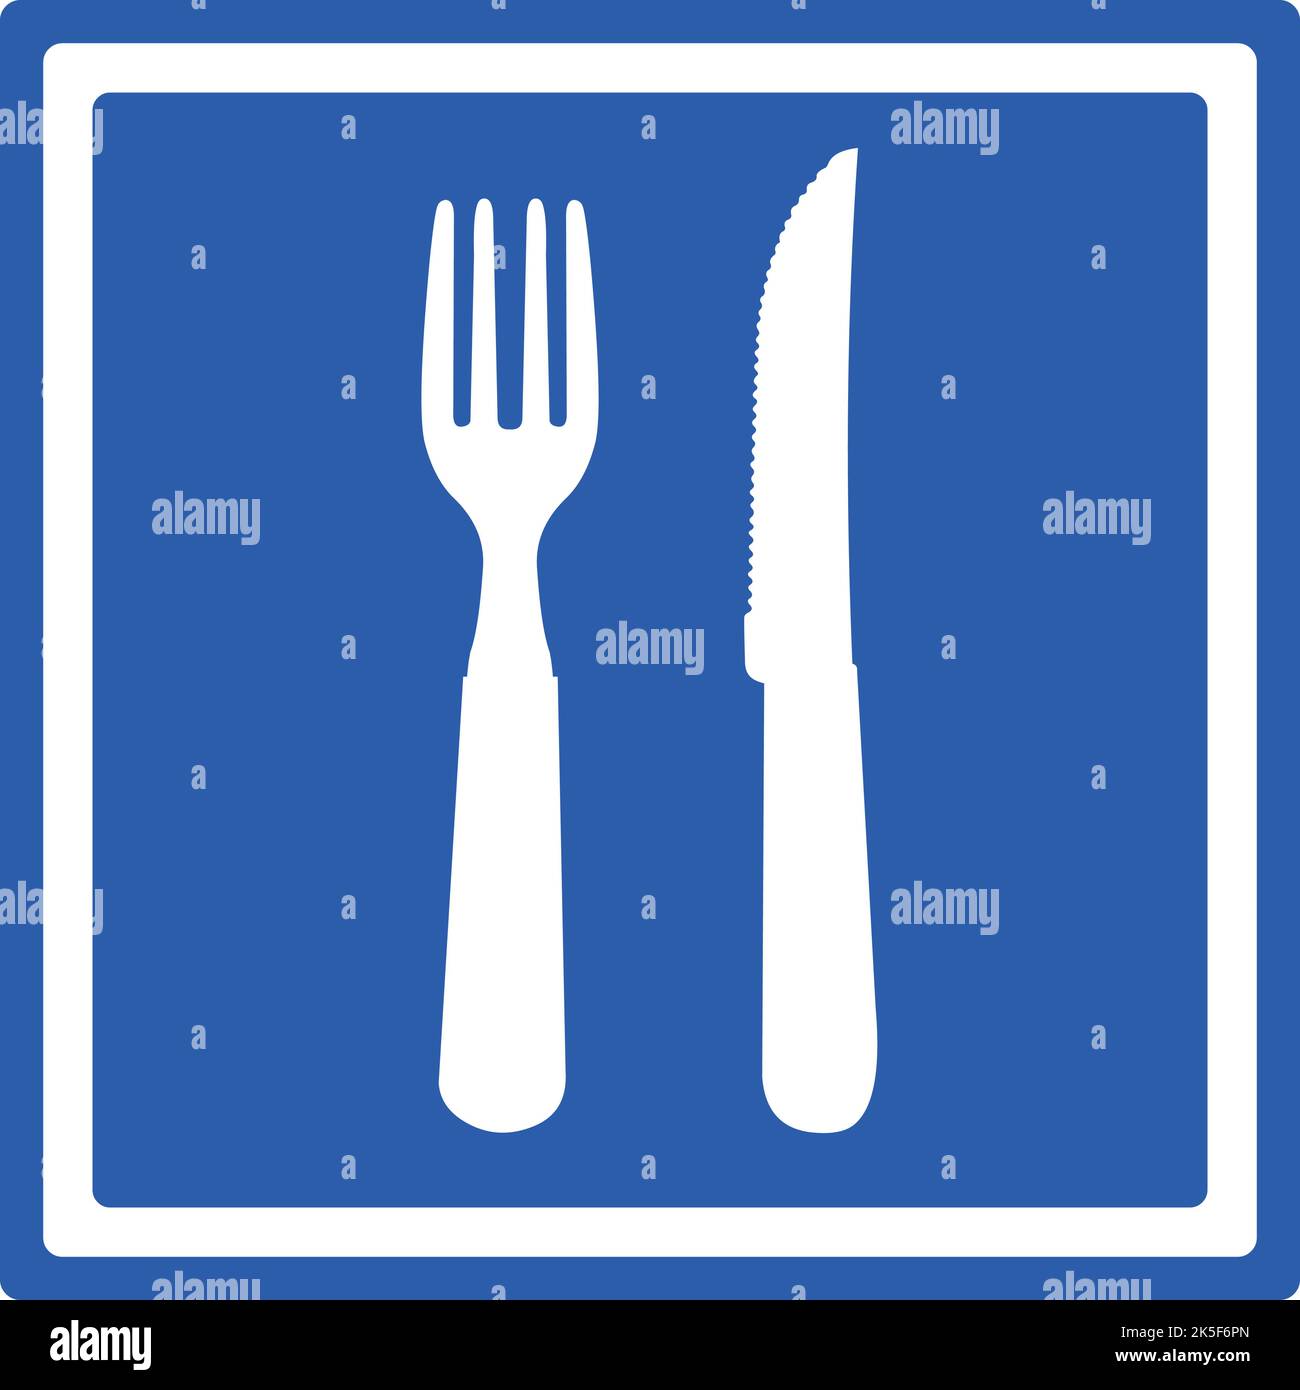 Vector illustration of square traffic sign of blue and white color, indicating restaurant area Stock Vector